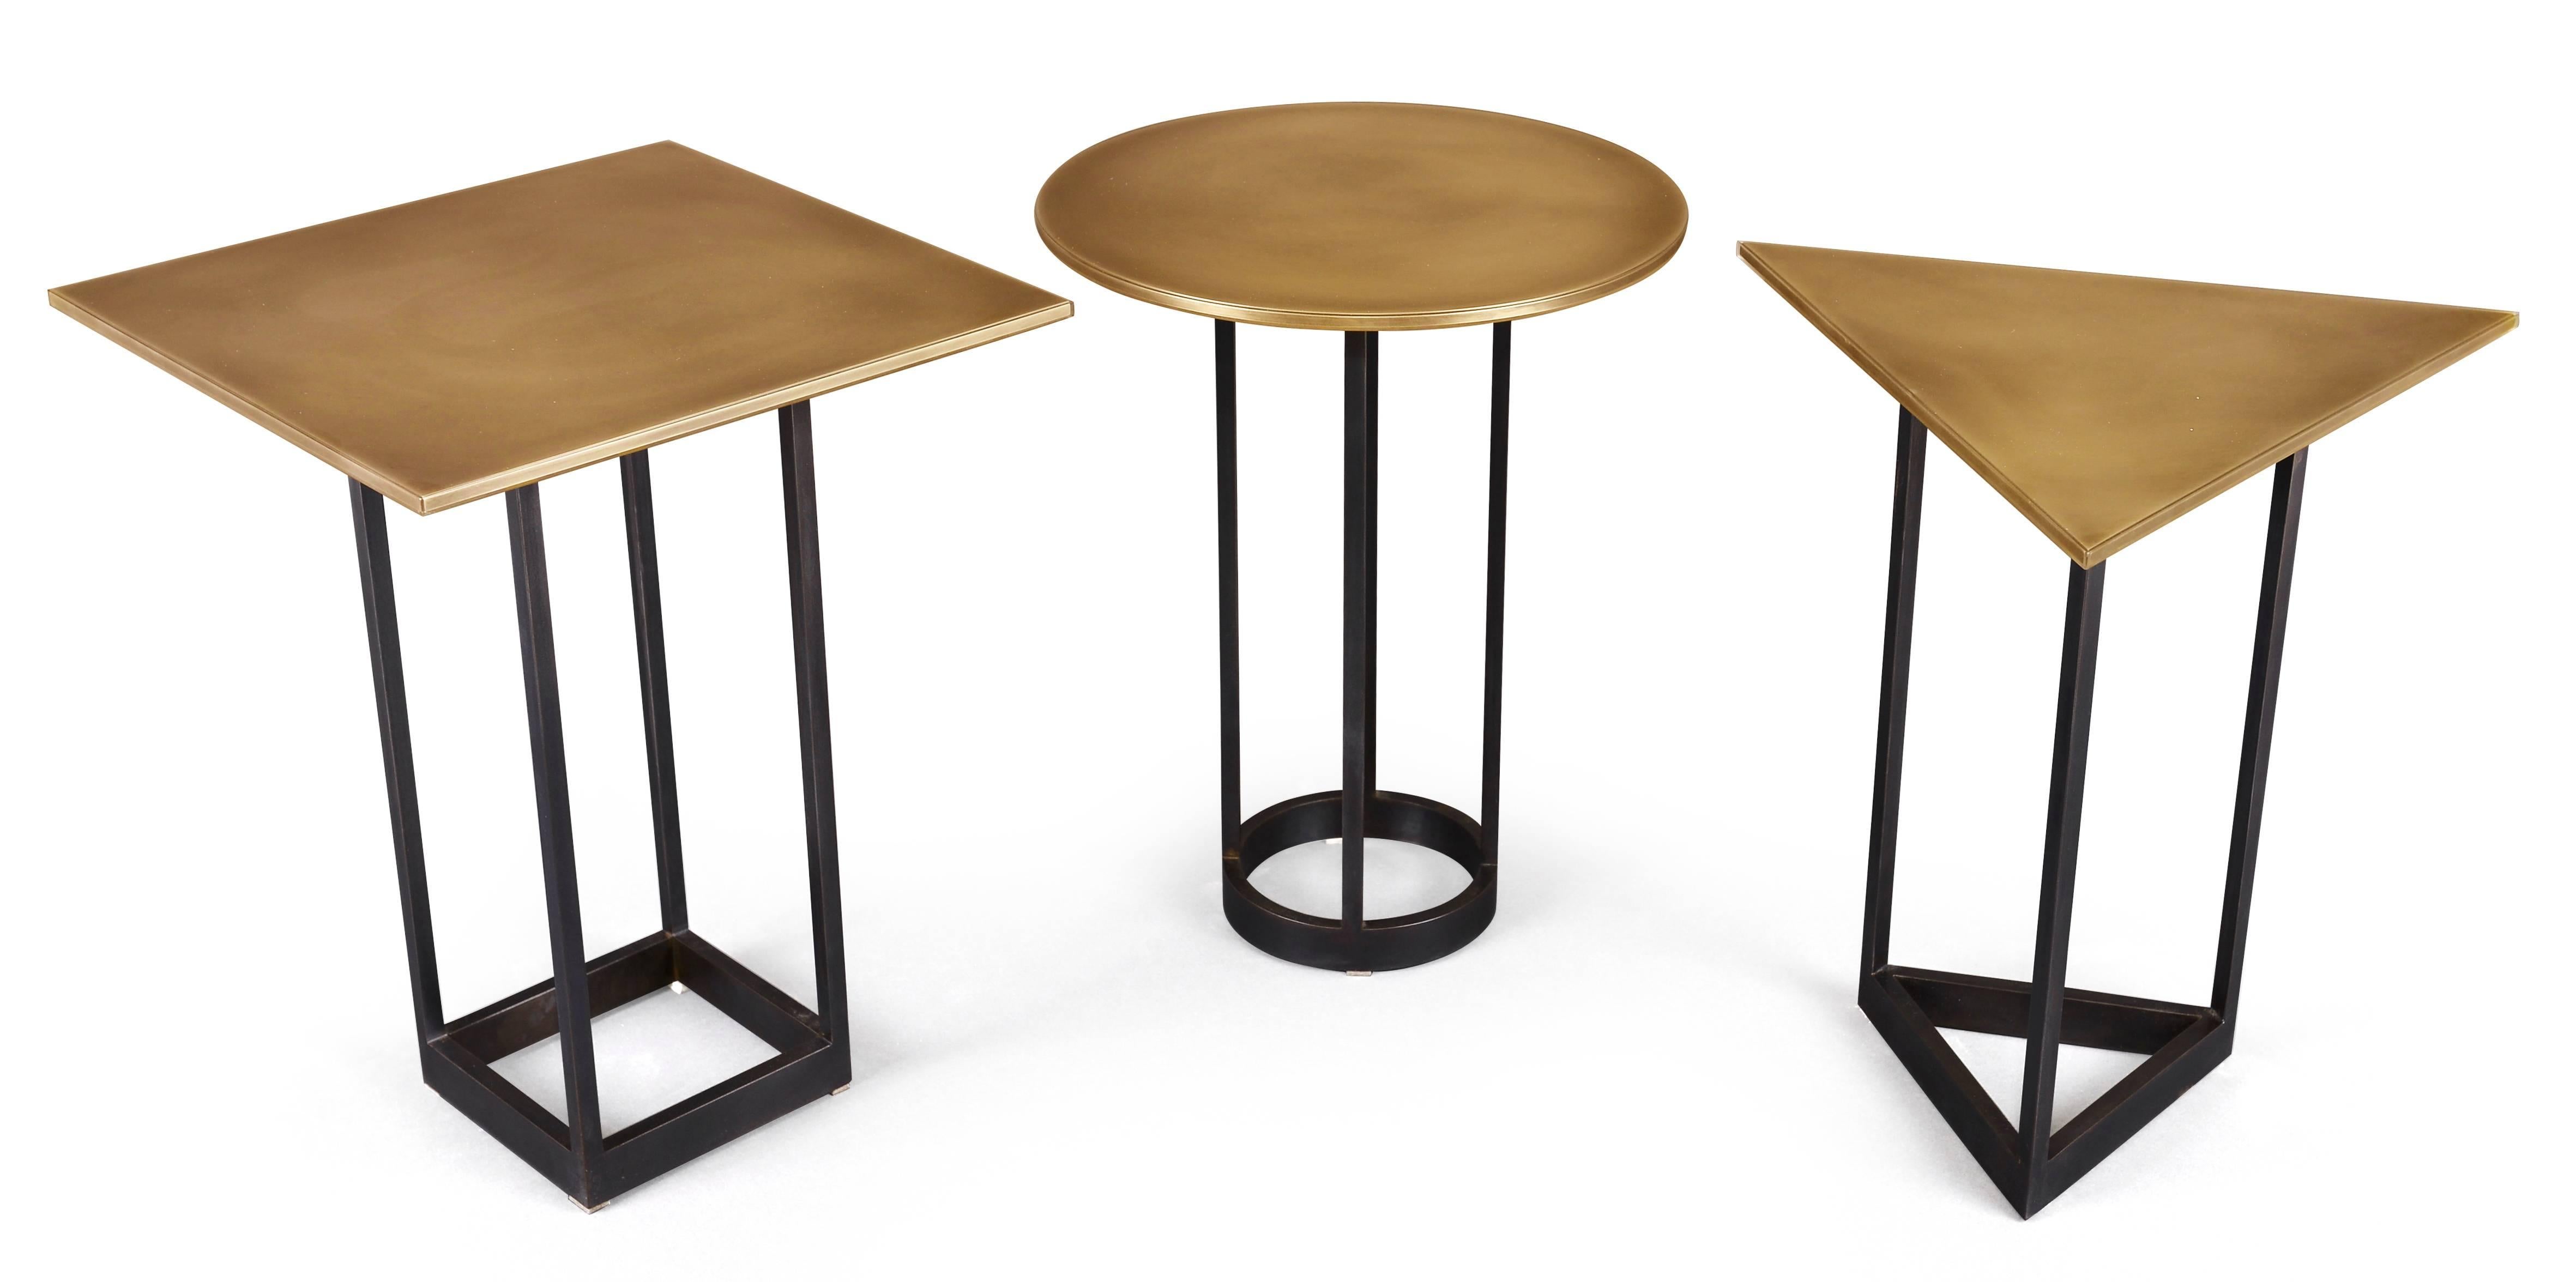 Part of the Gotham collection, these playful and modern geometric shaped end tables can be nested together or separated. Bronze encased in Epoxy Resin tabletops sit atop a blackened steel base. As the resin is non-porous, the table tops are ideal